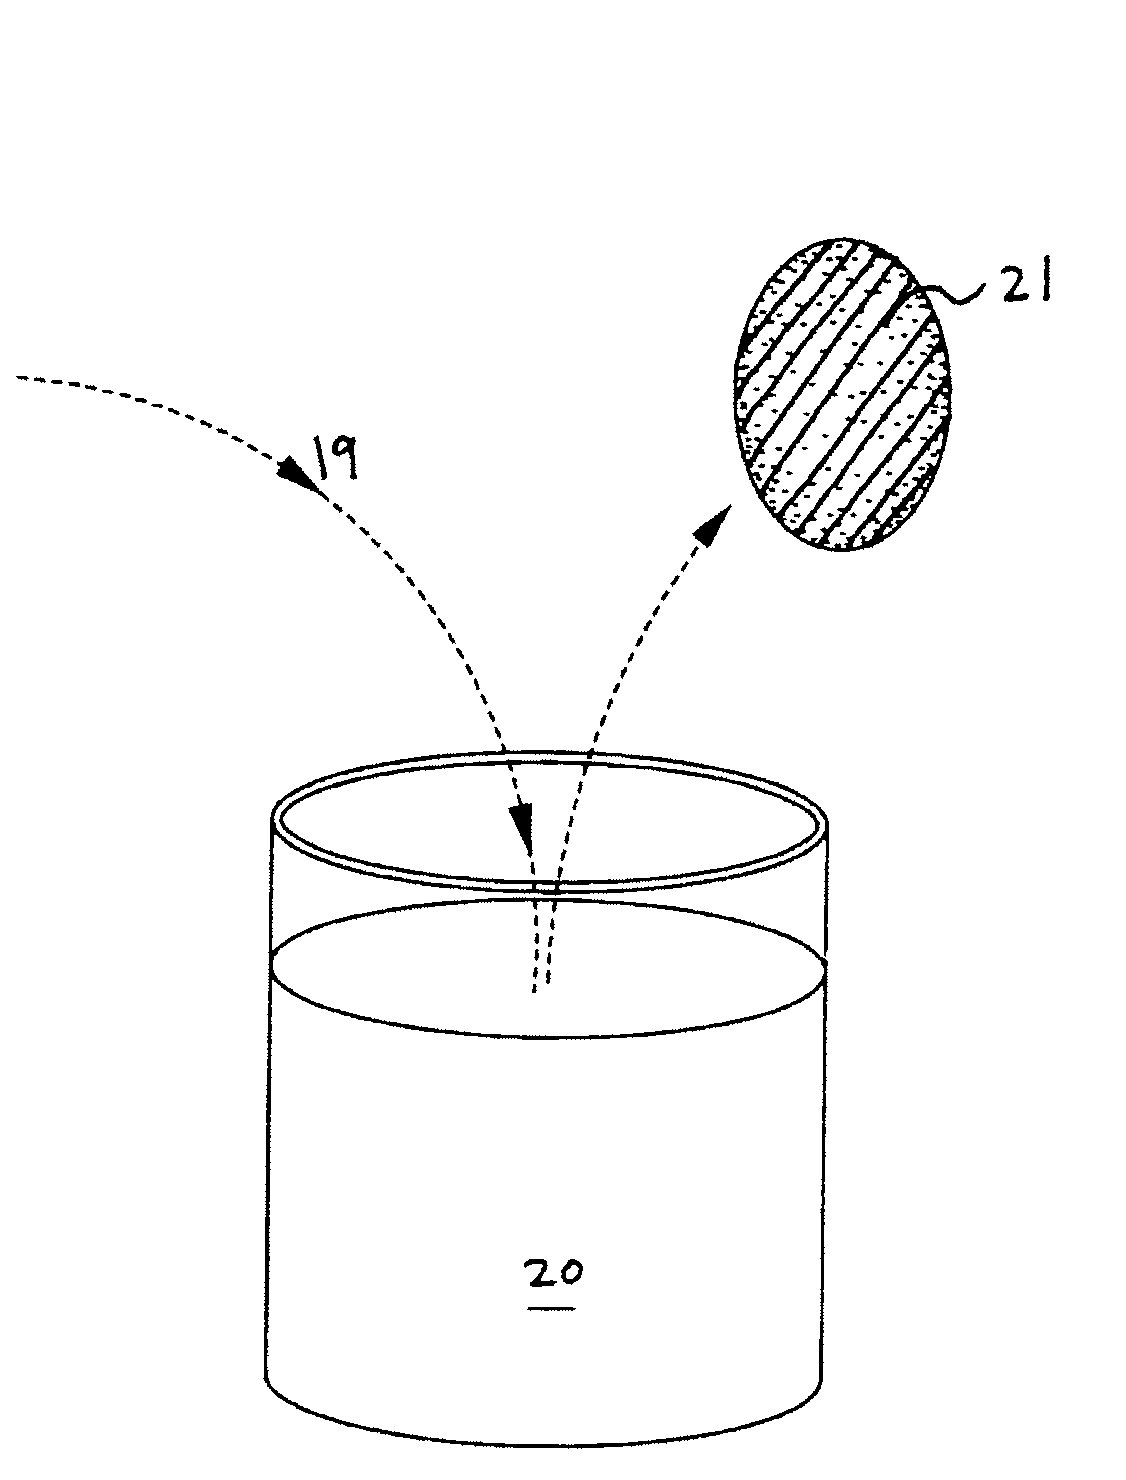 Implants and methods for manufacturing same